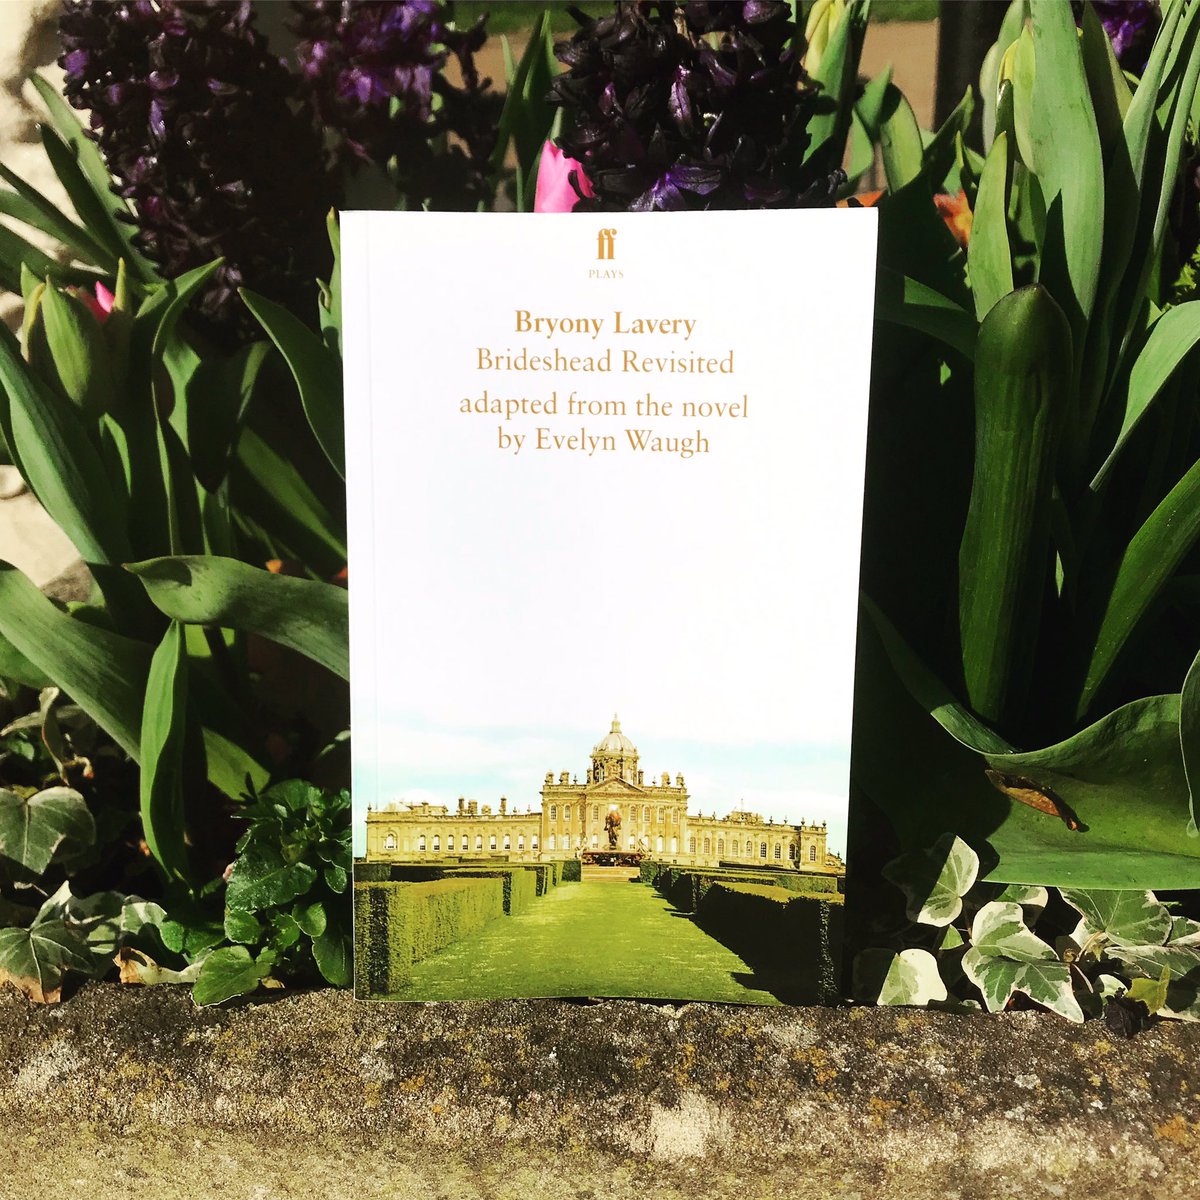 Play 800 - Brideshead Revisited by Evelyn Waugh, apt. by Bryony Lavery. A stage version of Waugh's stunning novel of duty & desire set amongst the decadent, faded glory of the English aristocracy in the run-up to WWII. #playreading #BridesheadRevisited #EvelynWaugh #BryonyLavery